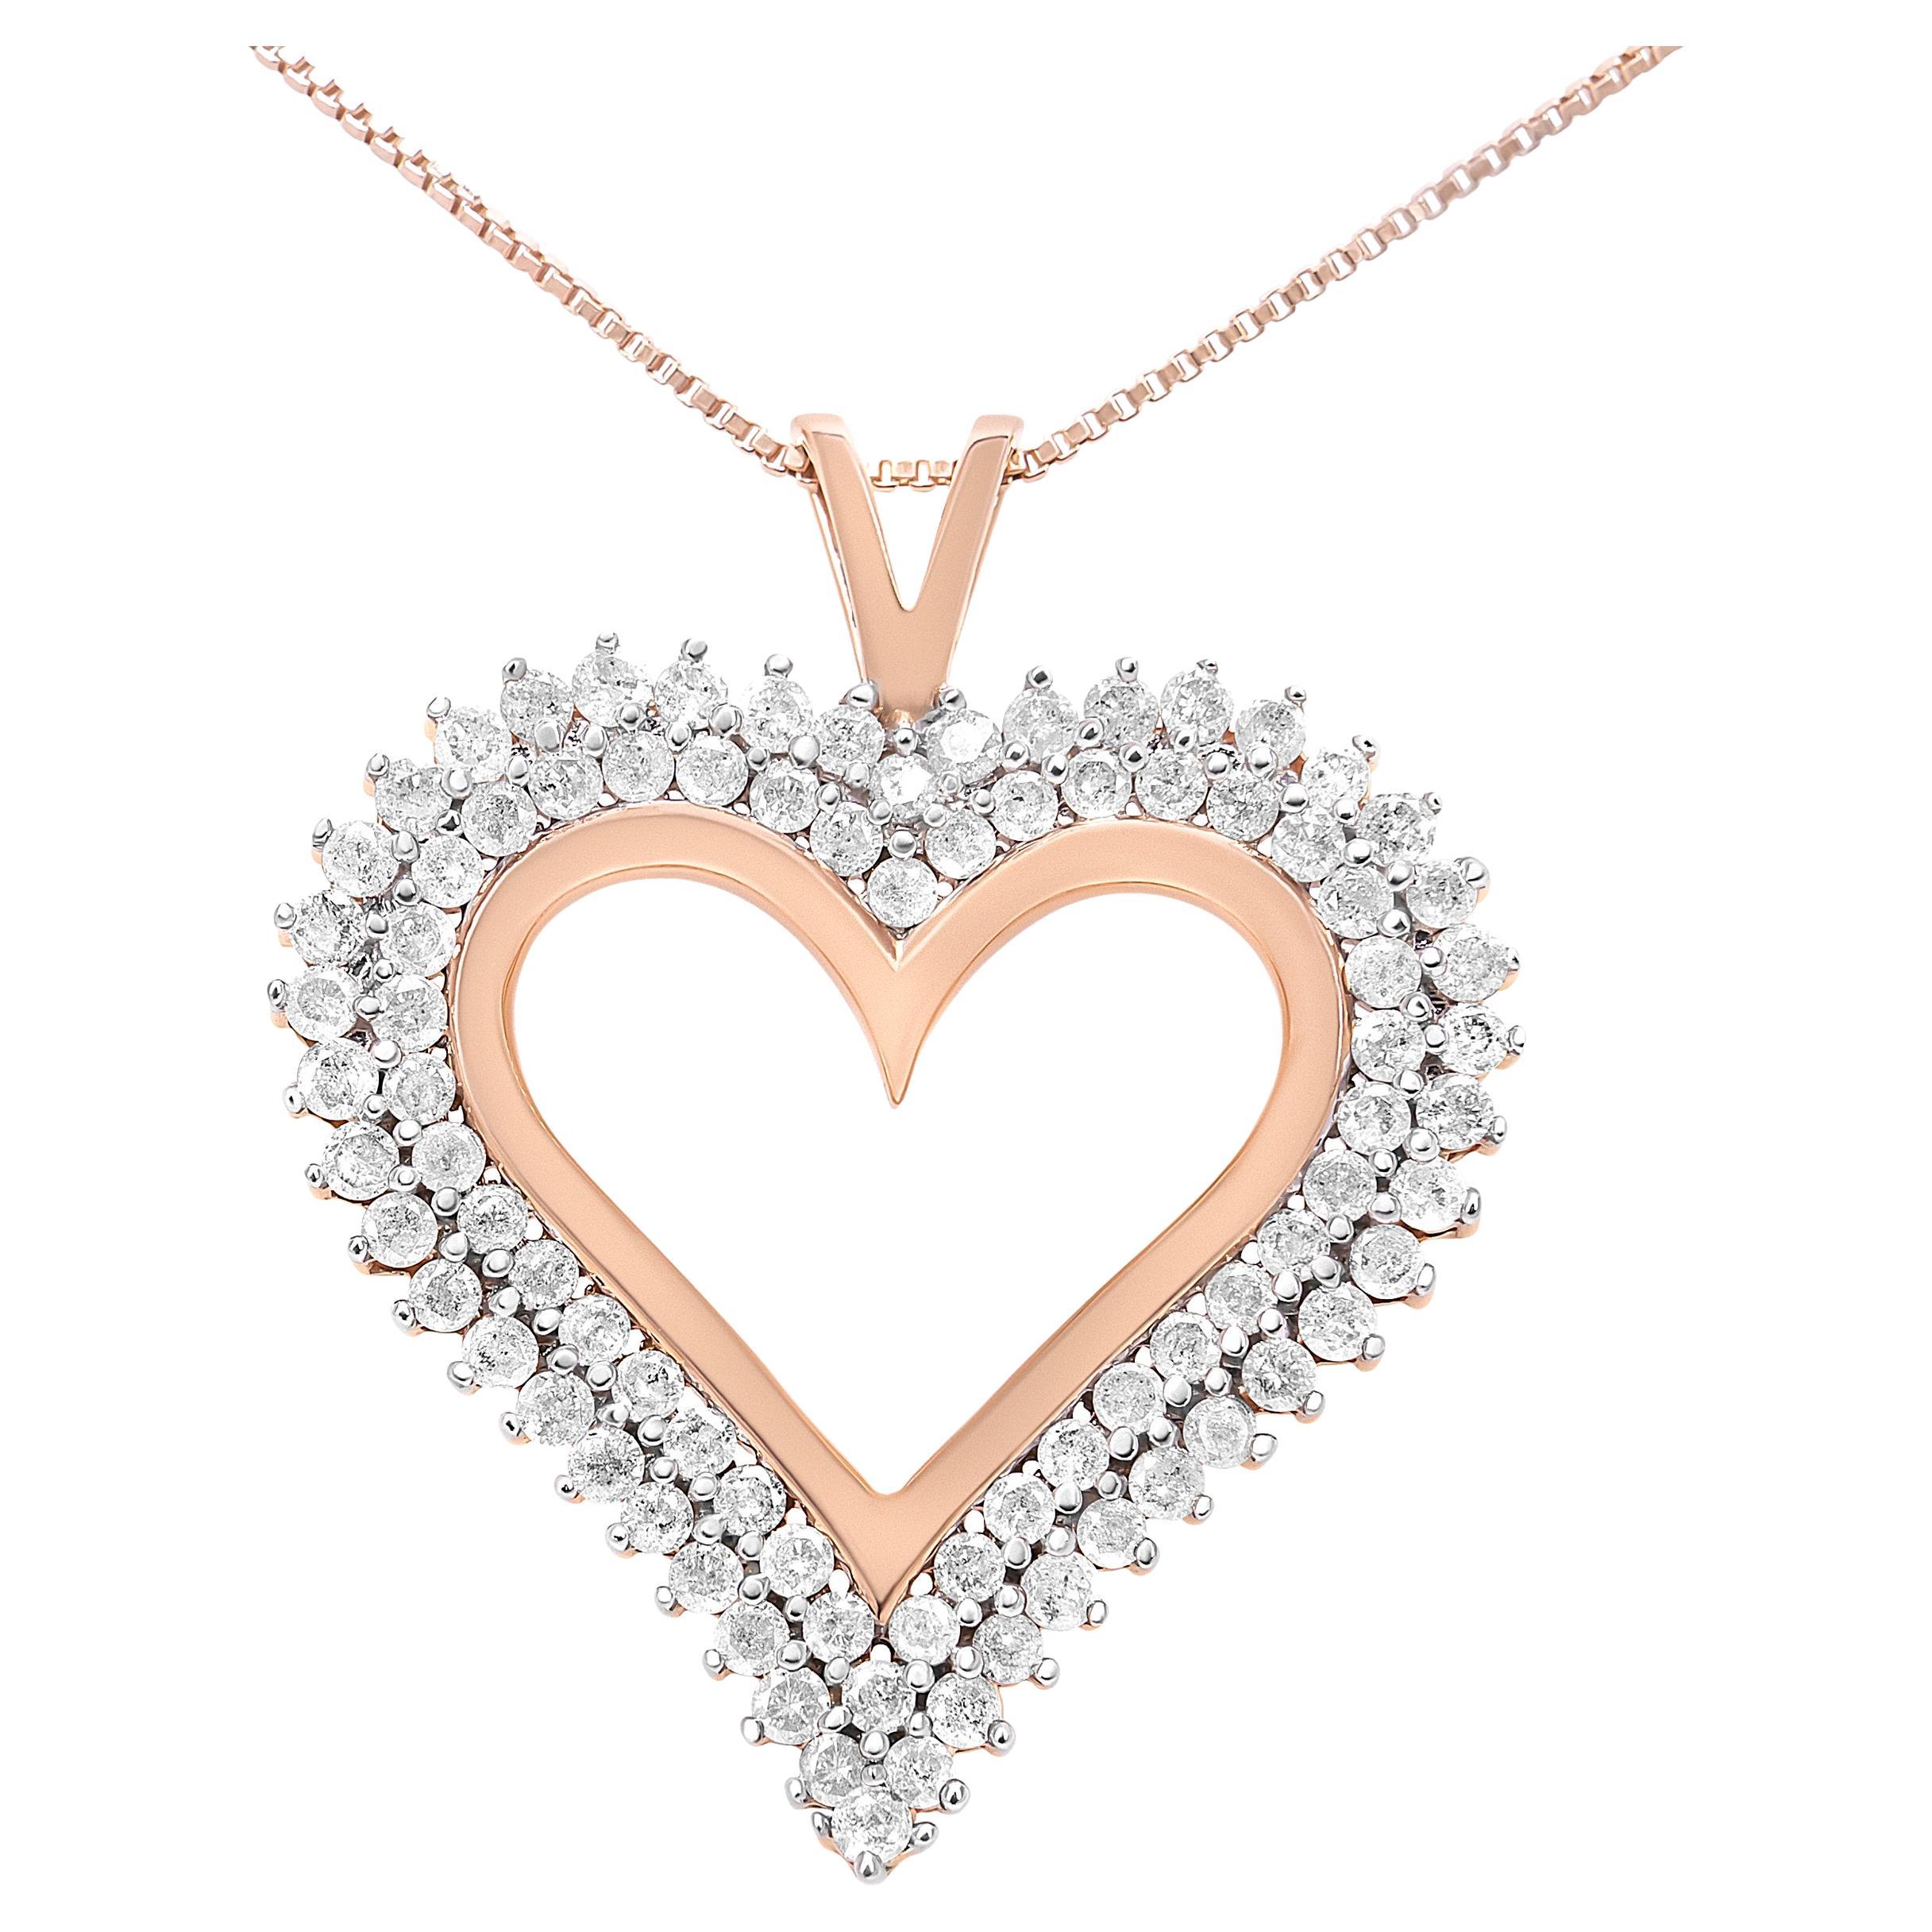 10K Rose Gold Plated Sterling Silver 3.0 Carat Diamond Heart Pendant Necklace For Sale